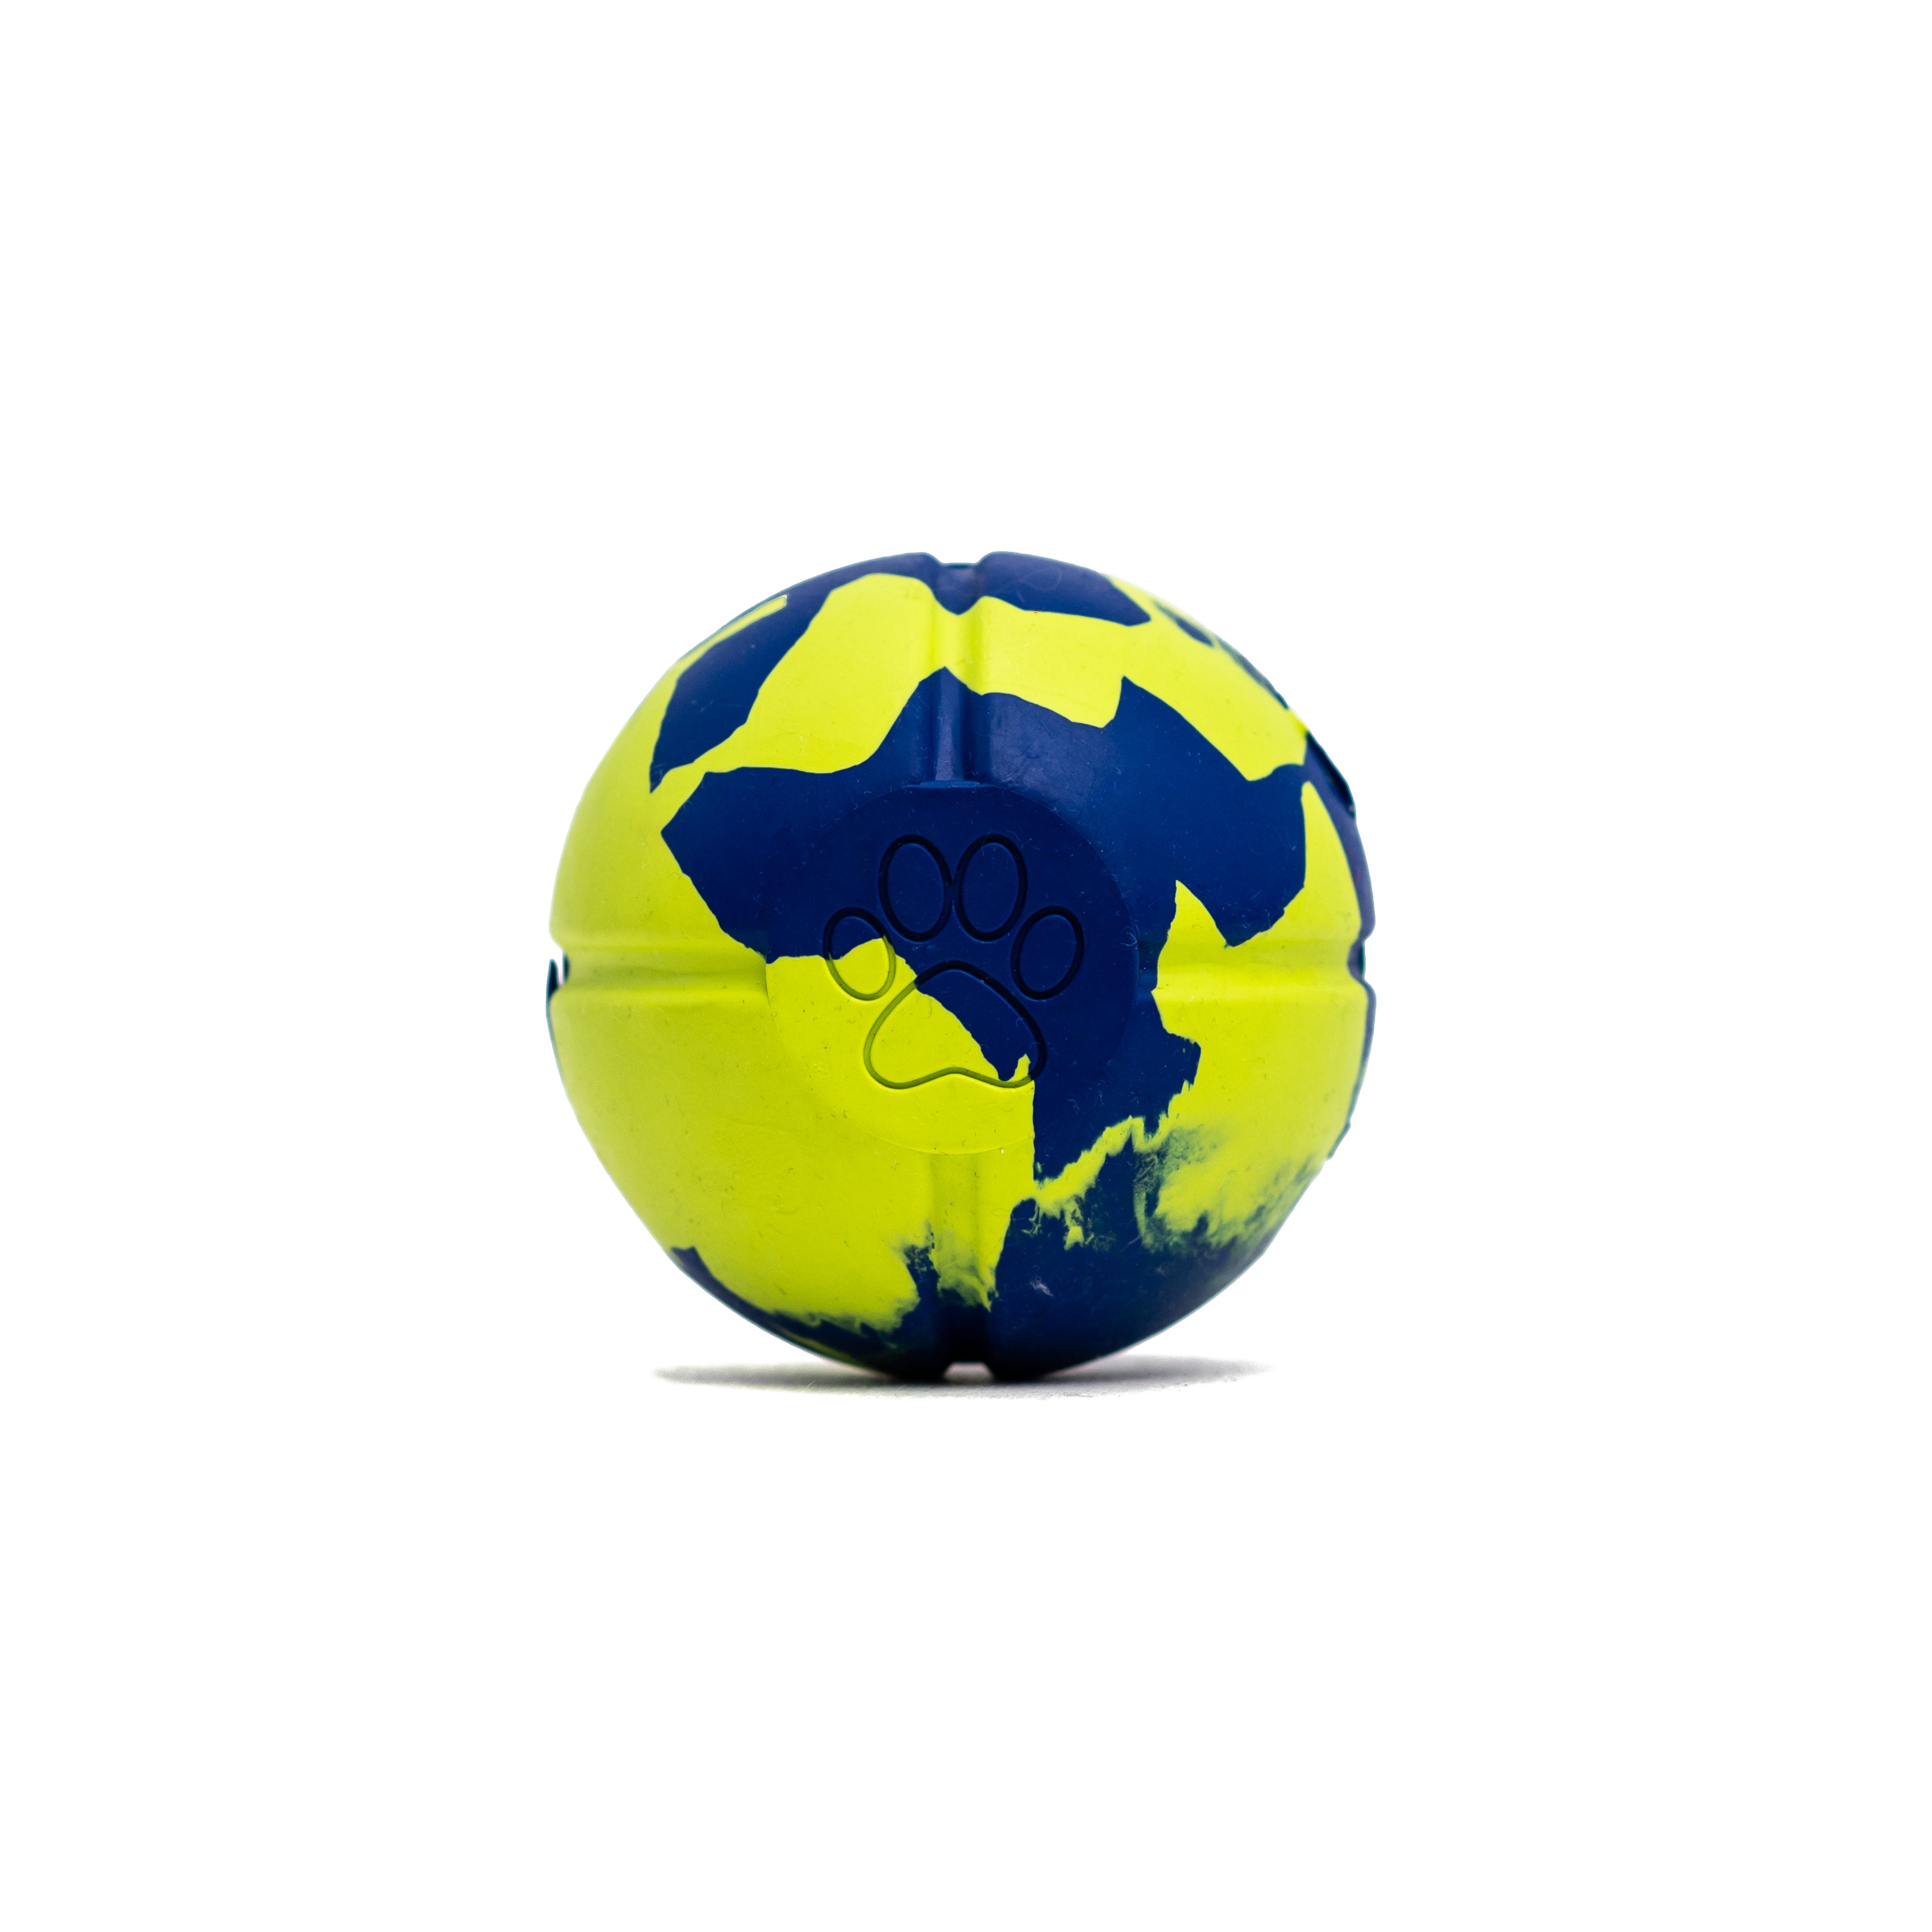 If you are a dog lover, playing with your dog is an important part of building a connection with your best friend! A7 dog ball is made from natural rubber, which is non-toxic and very durable. Our dog toy is great as a chew toy and helps promote dog's gum health through chewing. You can fill the holes with peanut butter or a bully stick. The ball bounces very well and is amazing for fetching.